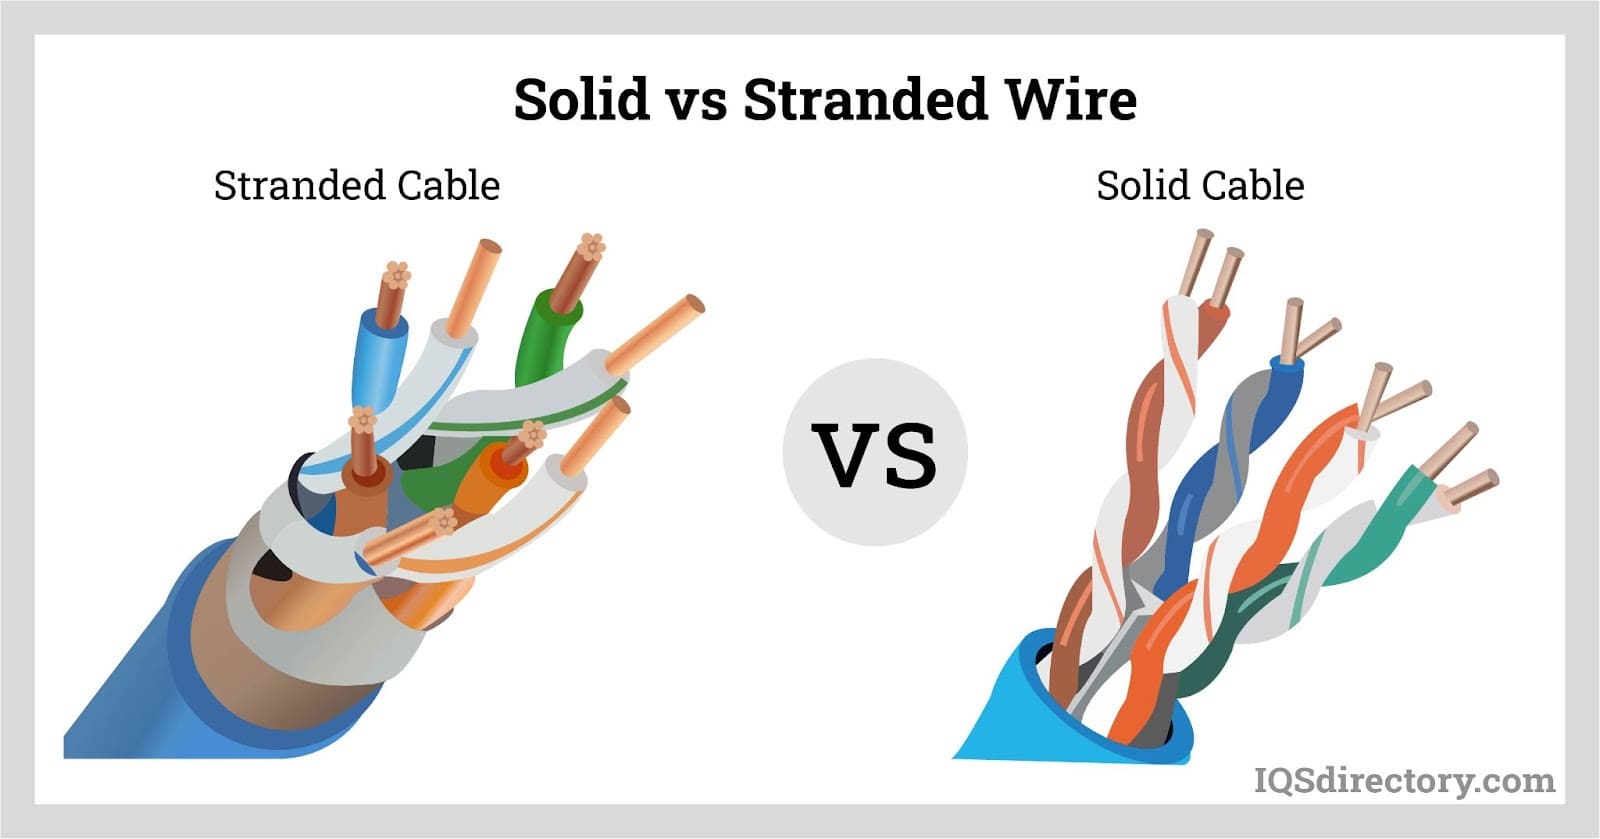 Solid vs Stranded Wire